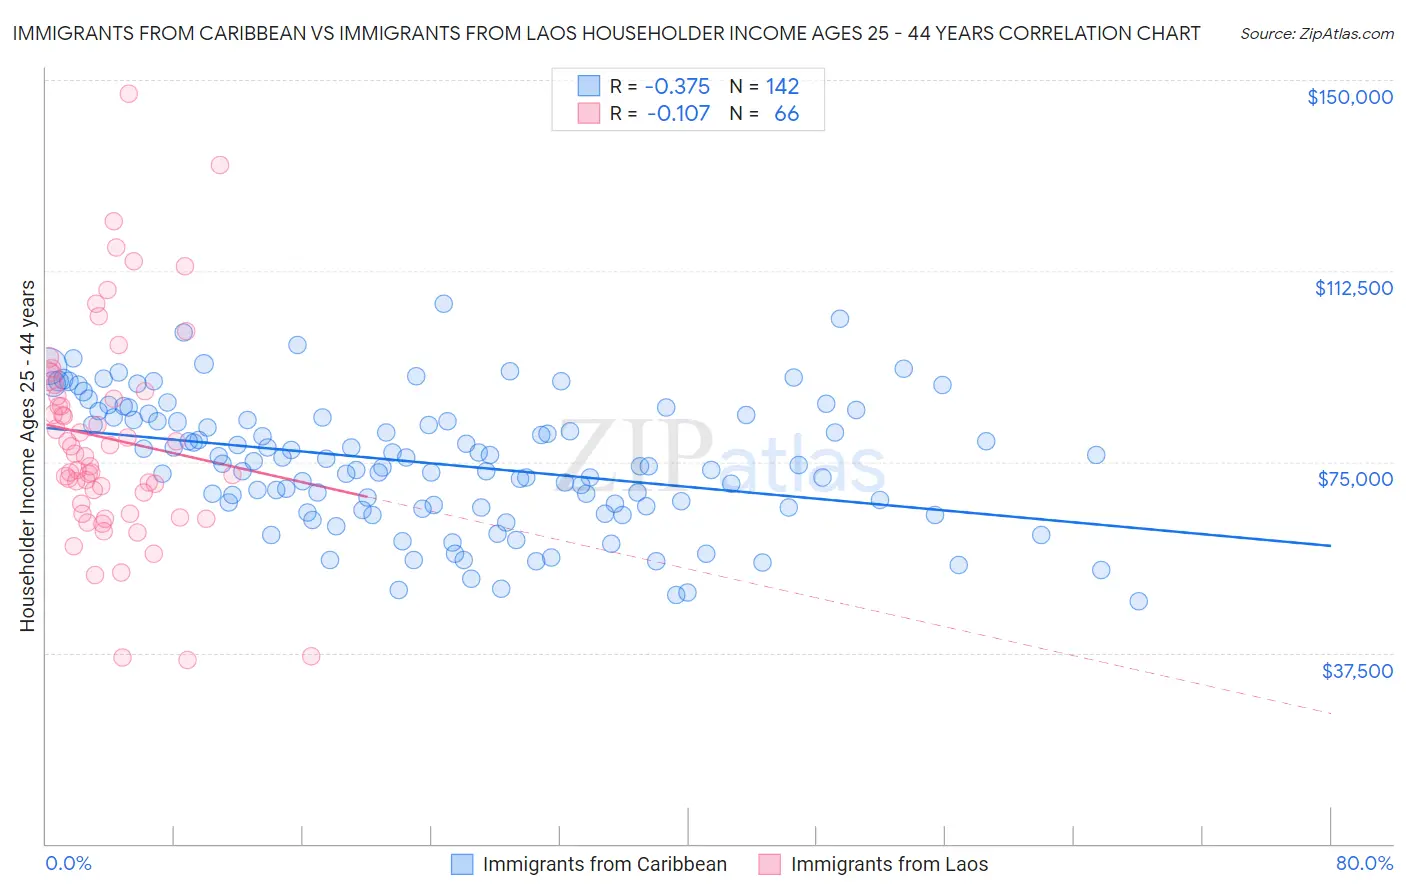 Immigrants from Caribbean vs Immigrants from Laos Householder Income Ages 25 - 44 years